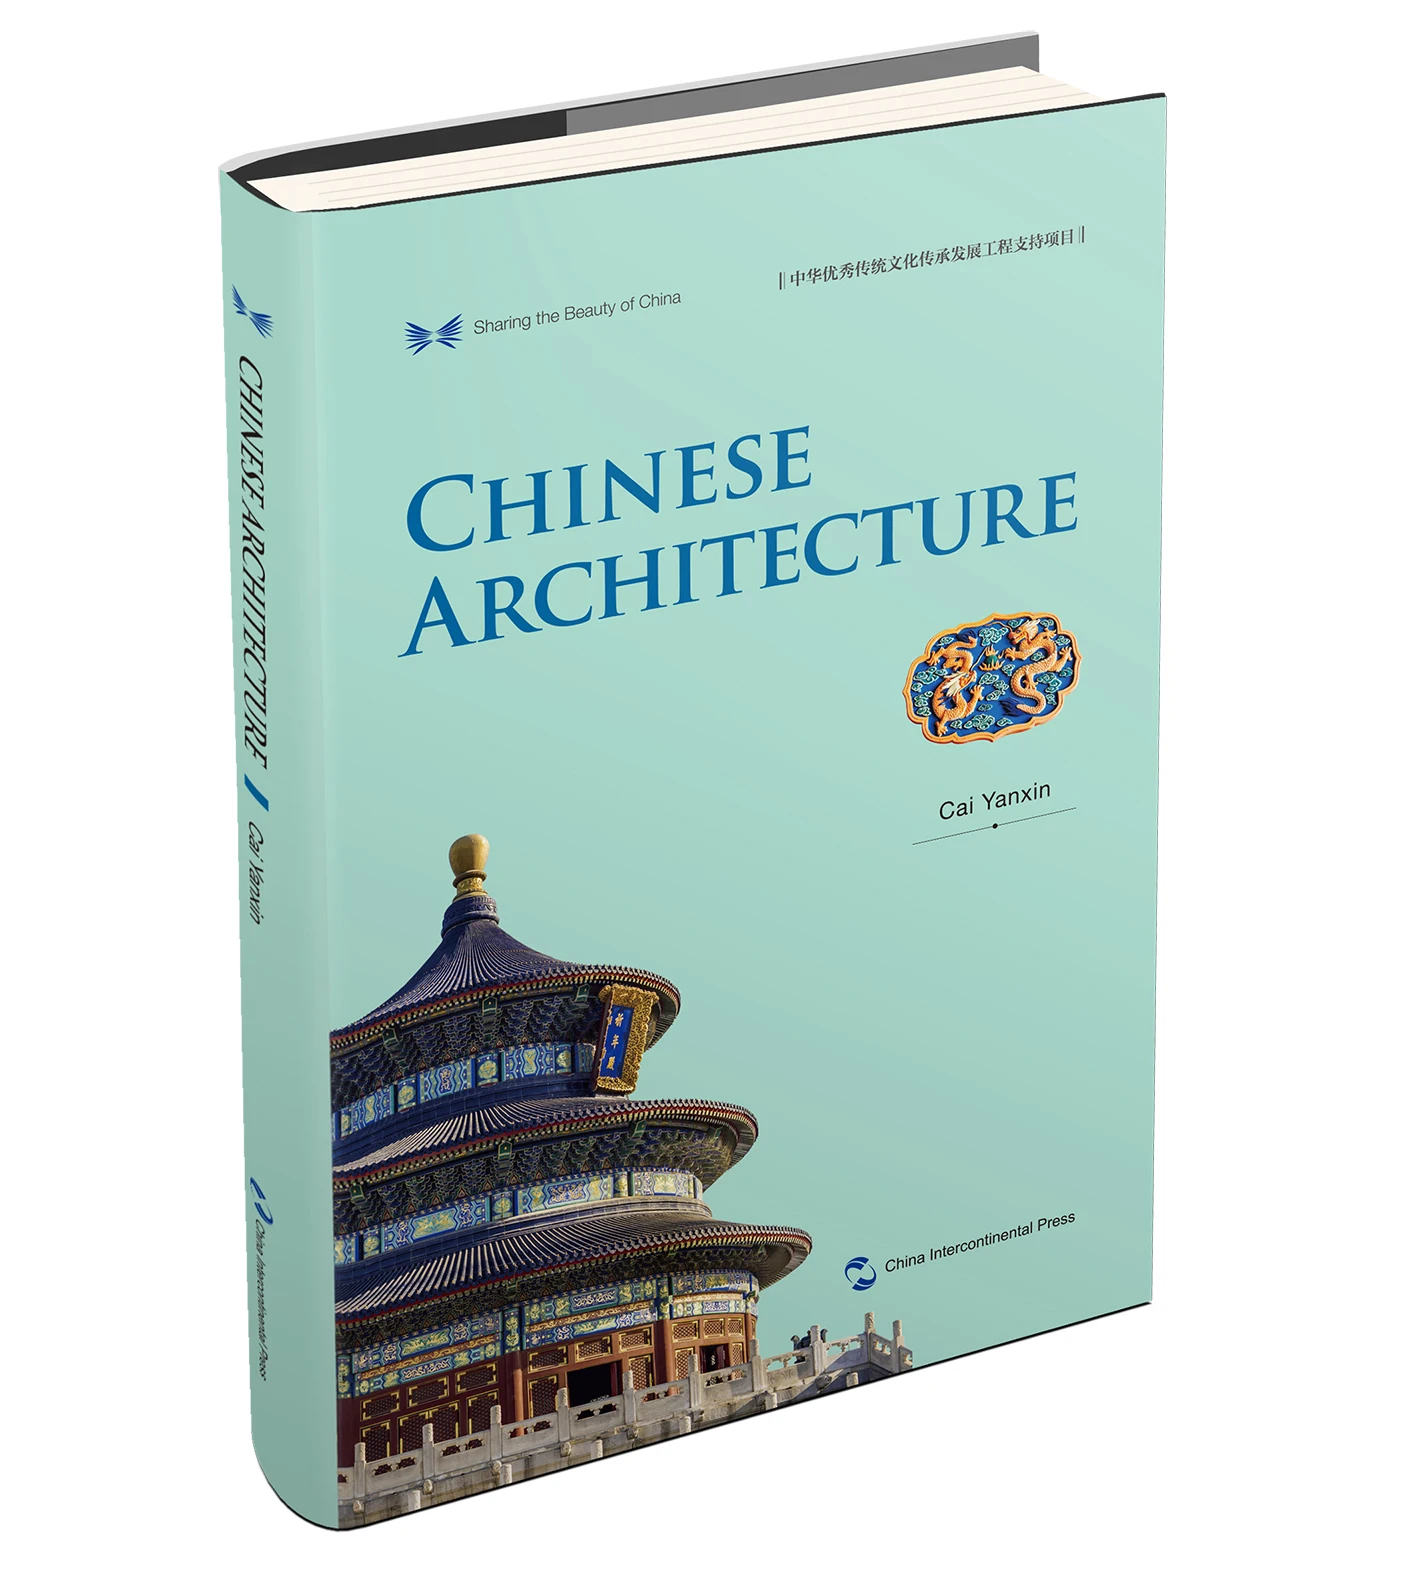 Sharing the Beauty of China: Chinese Architecture